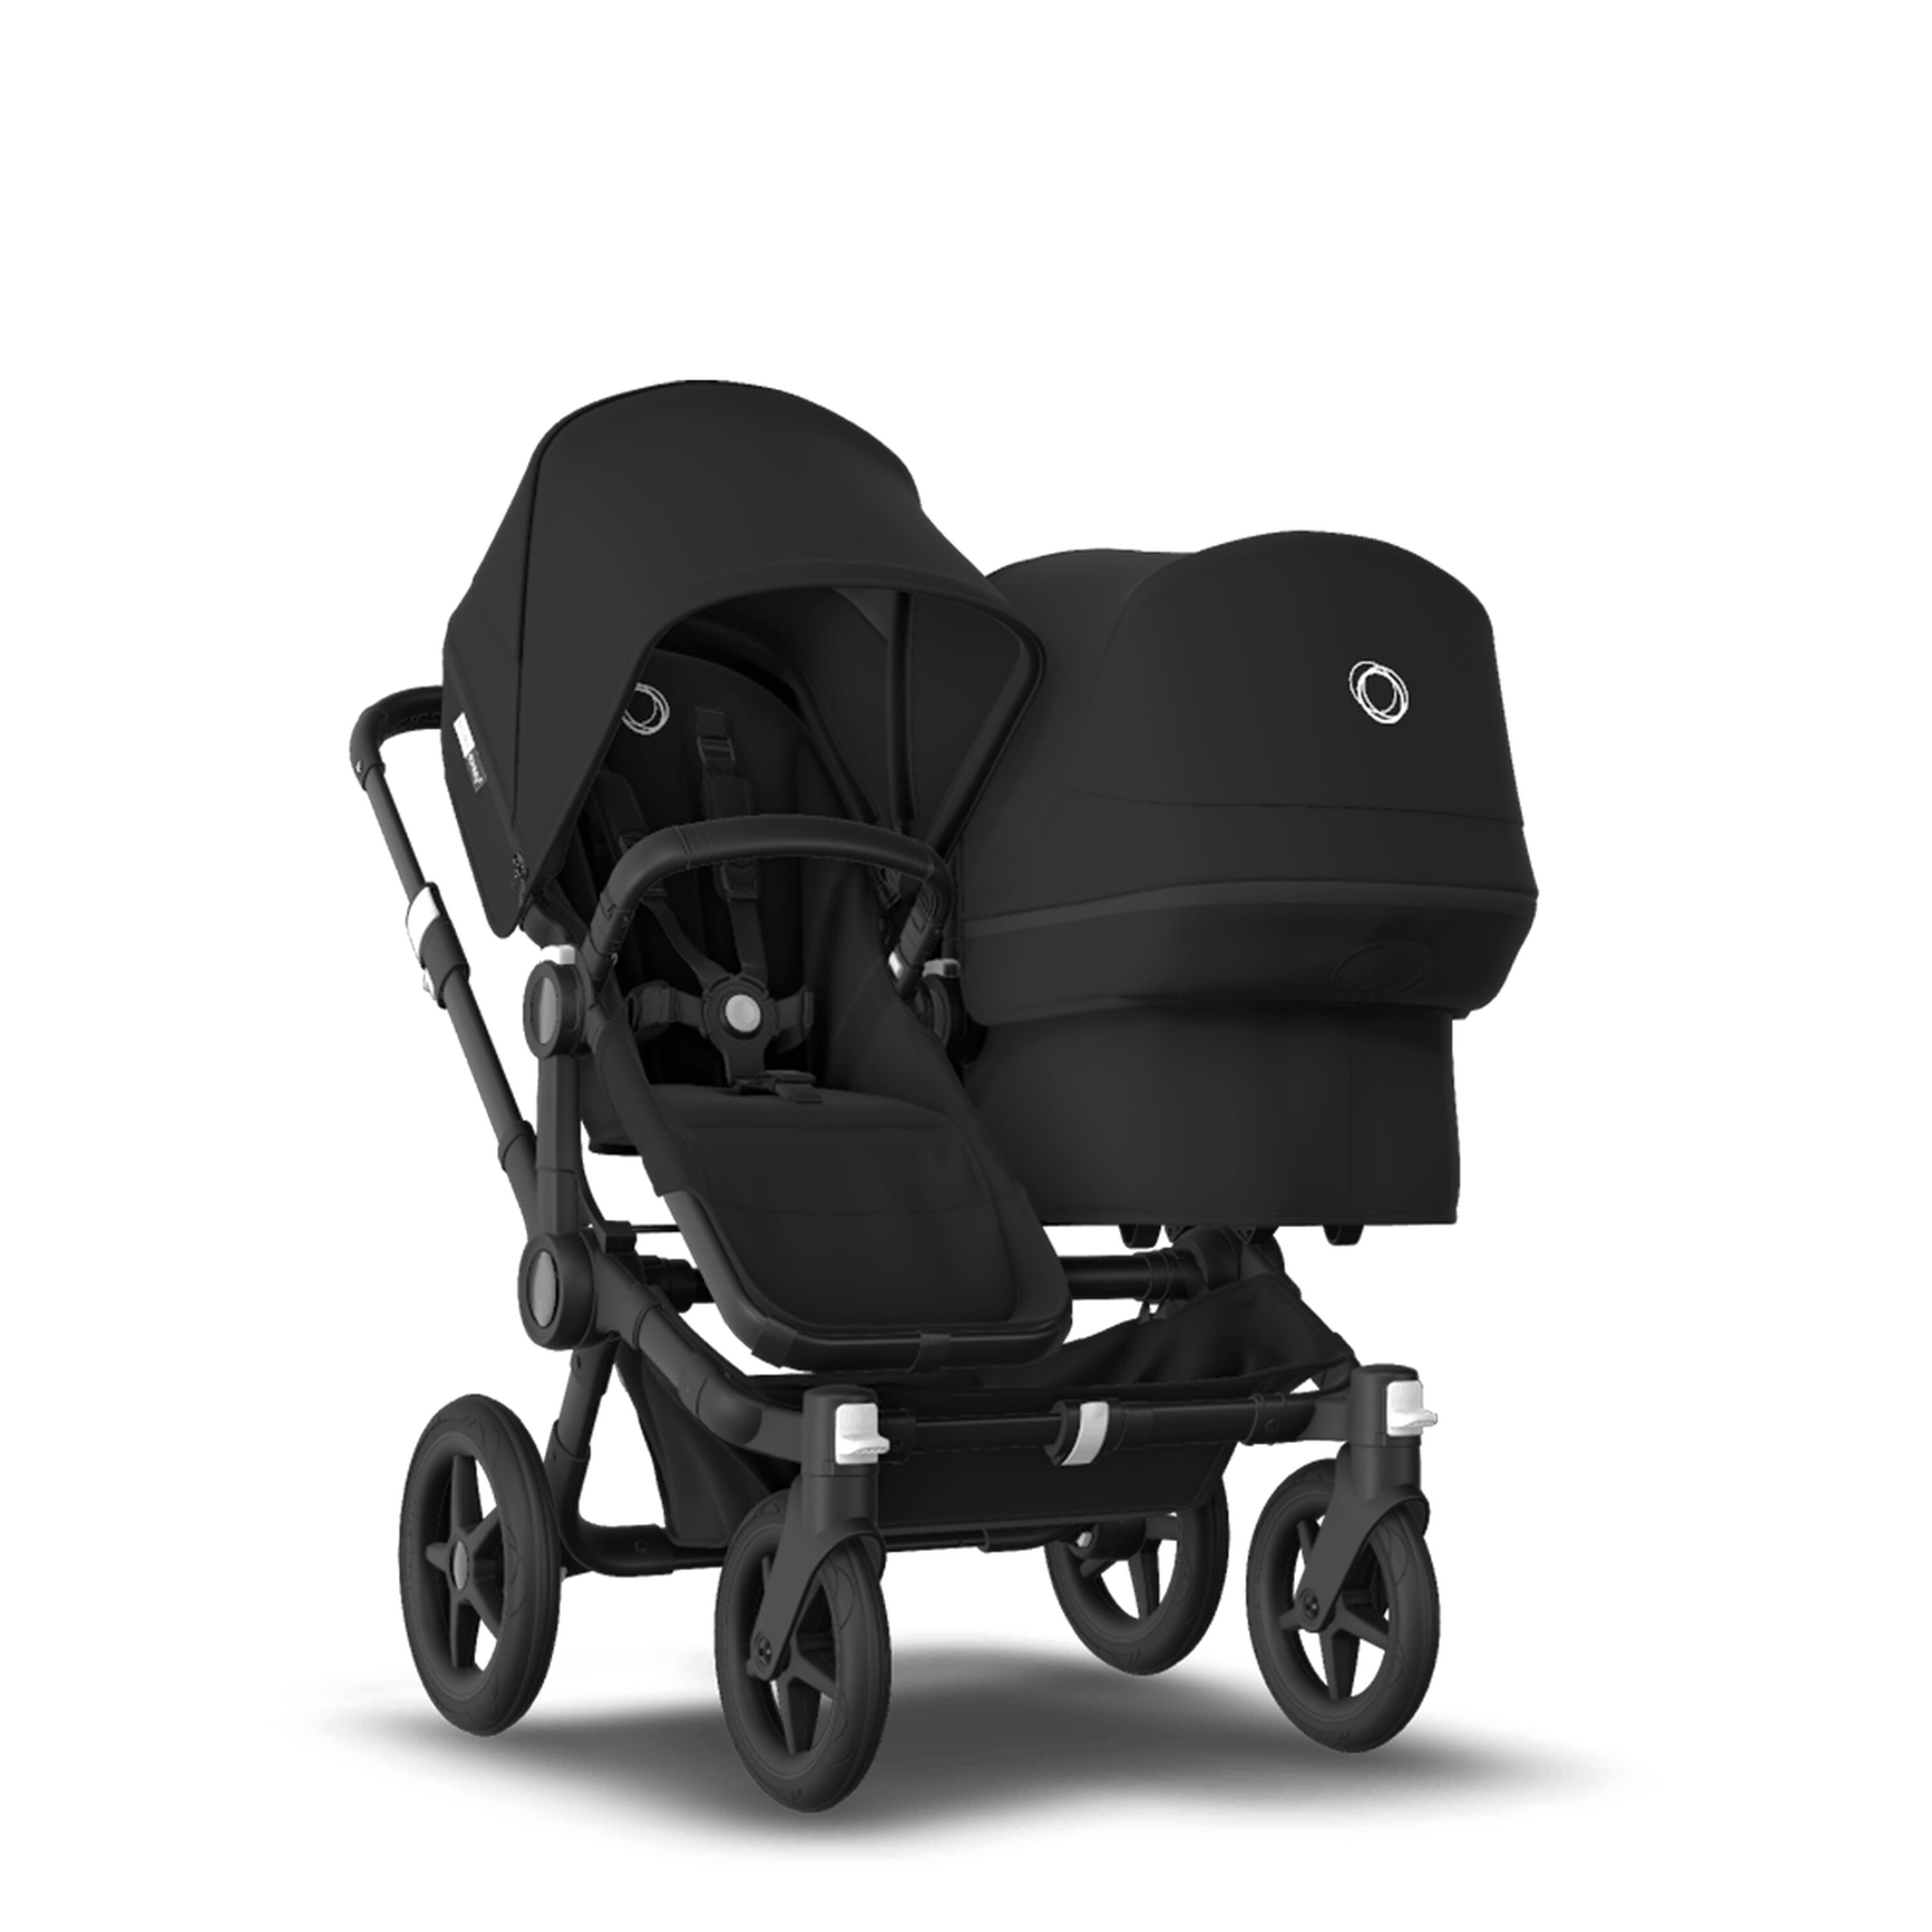 Por el contrario Compadecerse incompleto Bugaboo Donkey 3 Duo bassinet and seat stroller Black sun canopy, black  fabrics, black chassis | Bugaboo